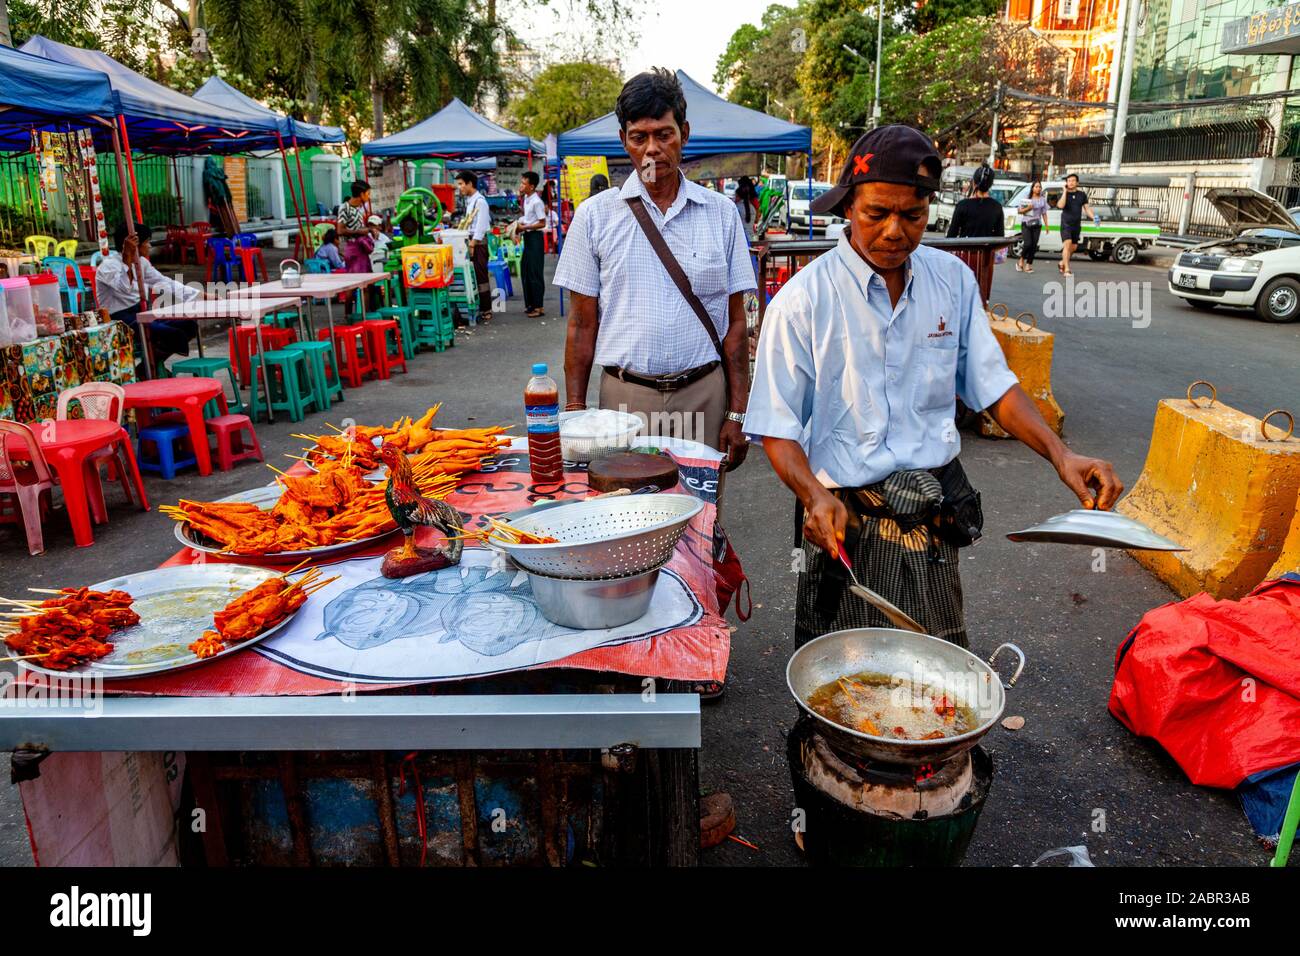 A Man Cooking Food At A Street Food Stall In Downtown Yangon, Yangon, Myanmar. Stock Photo